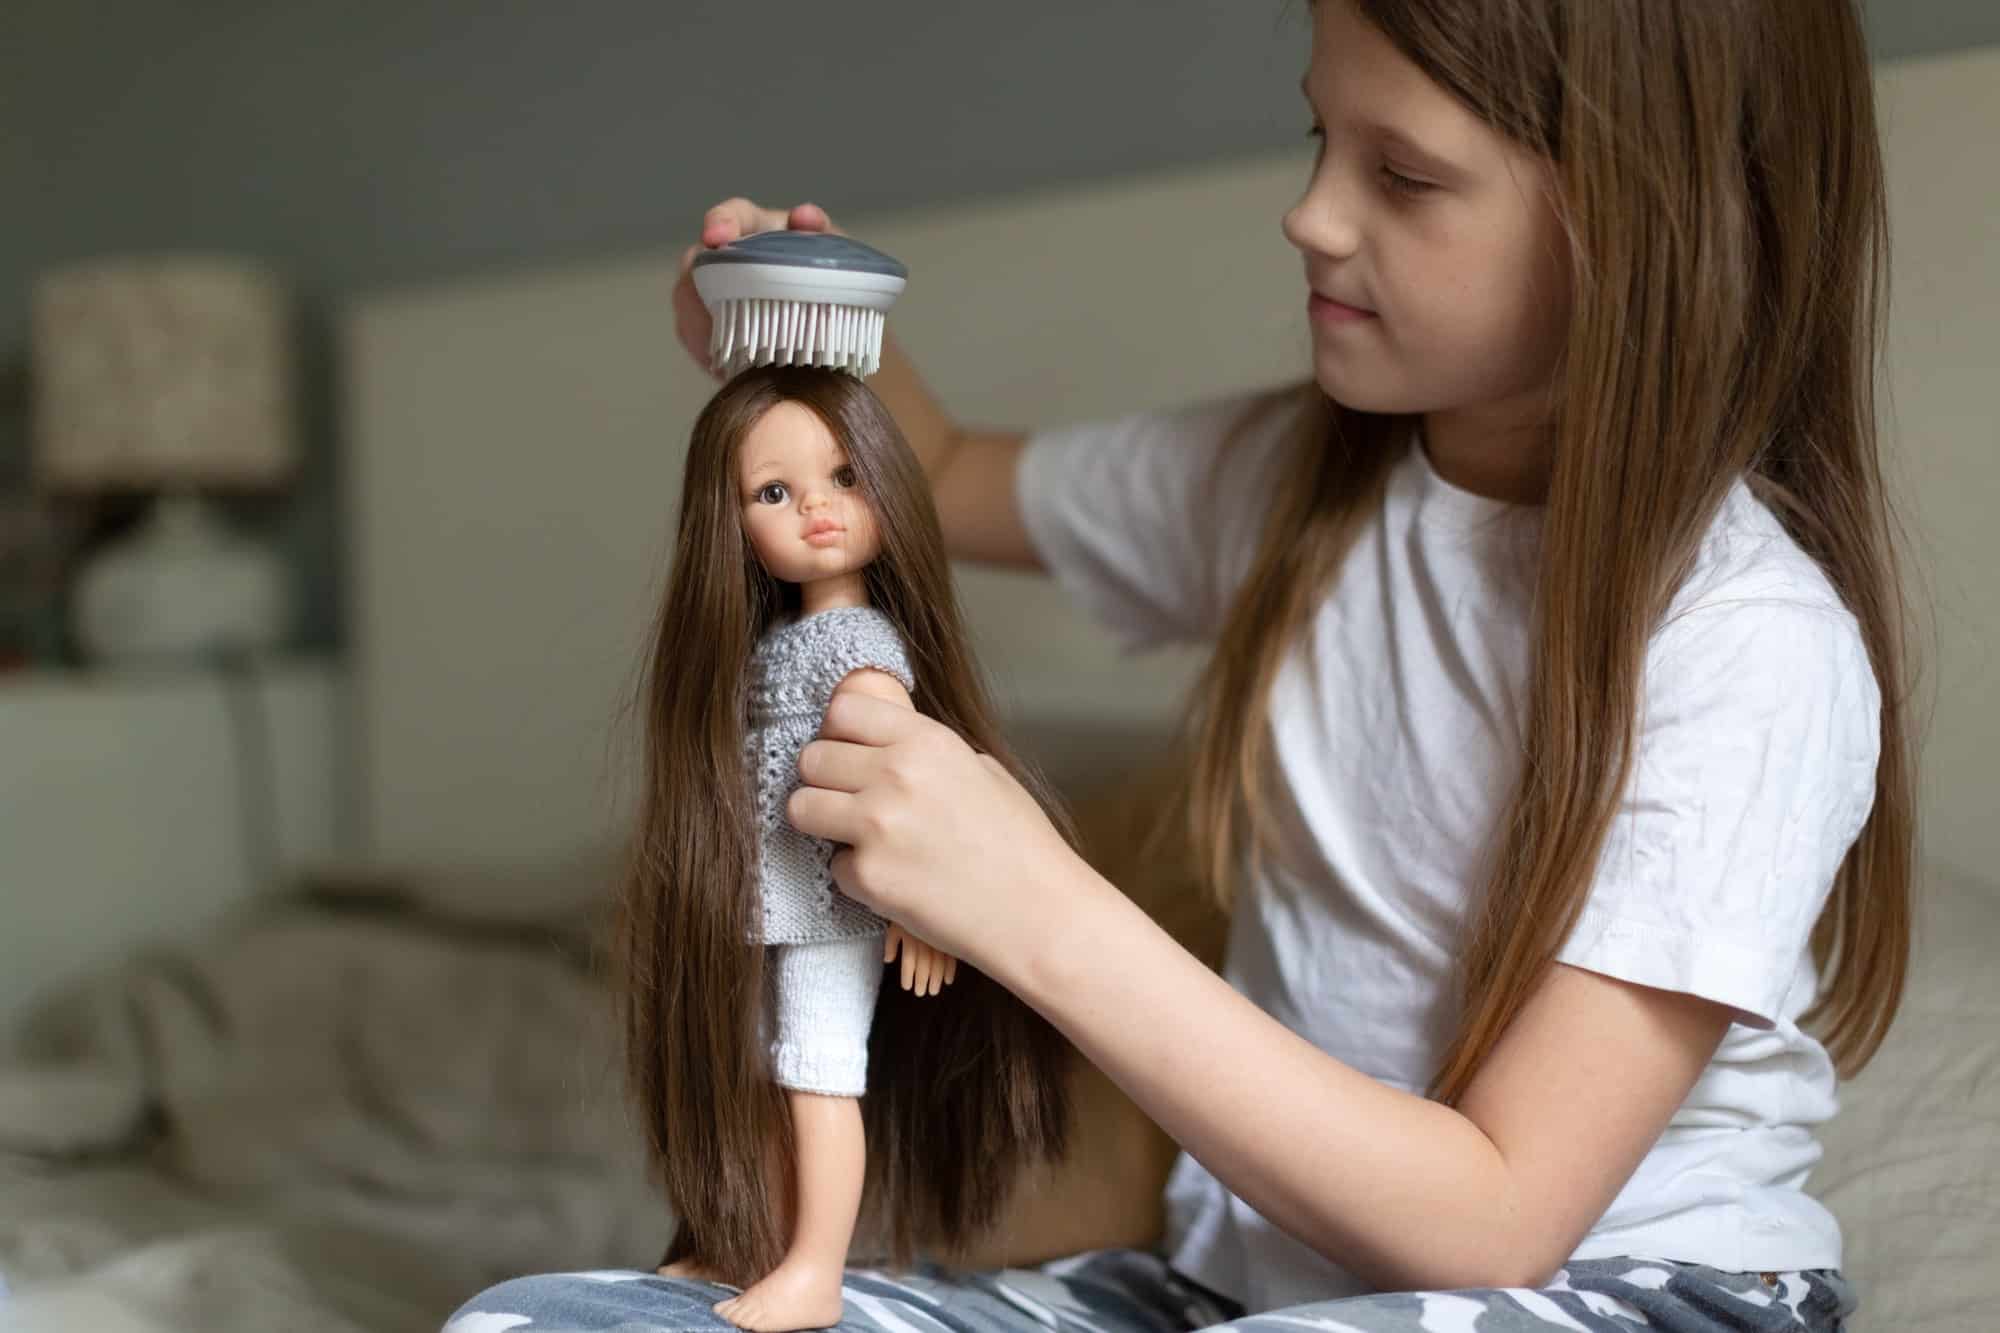 Caucasian girl combing a doll with long hair, a girl playing dolls. Traditional children's games